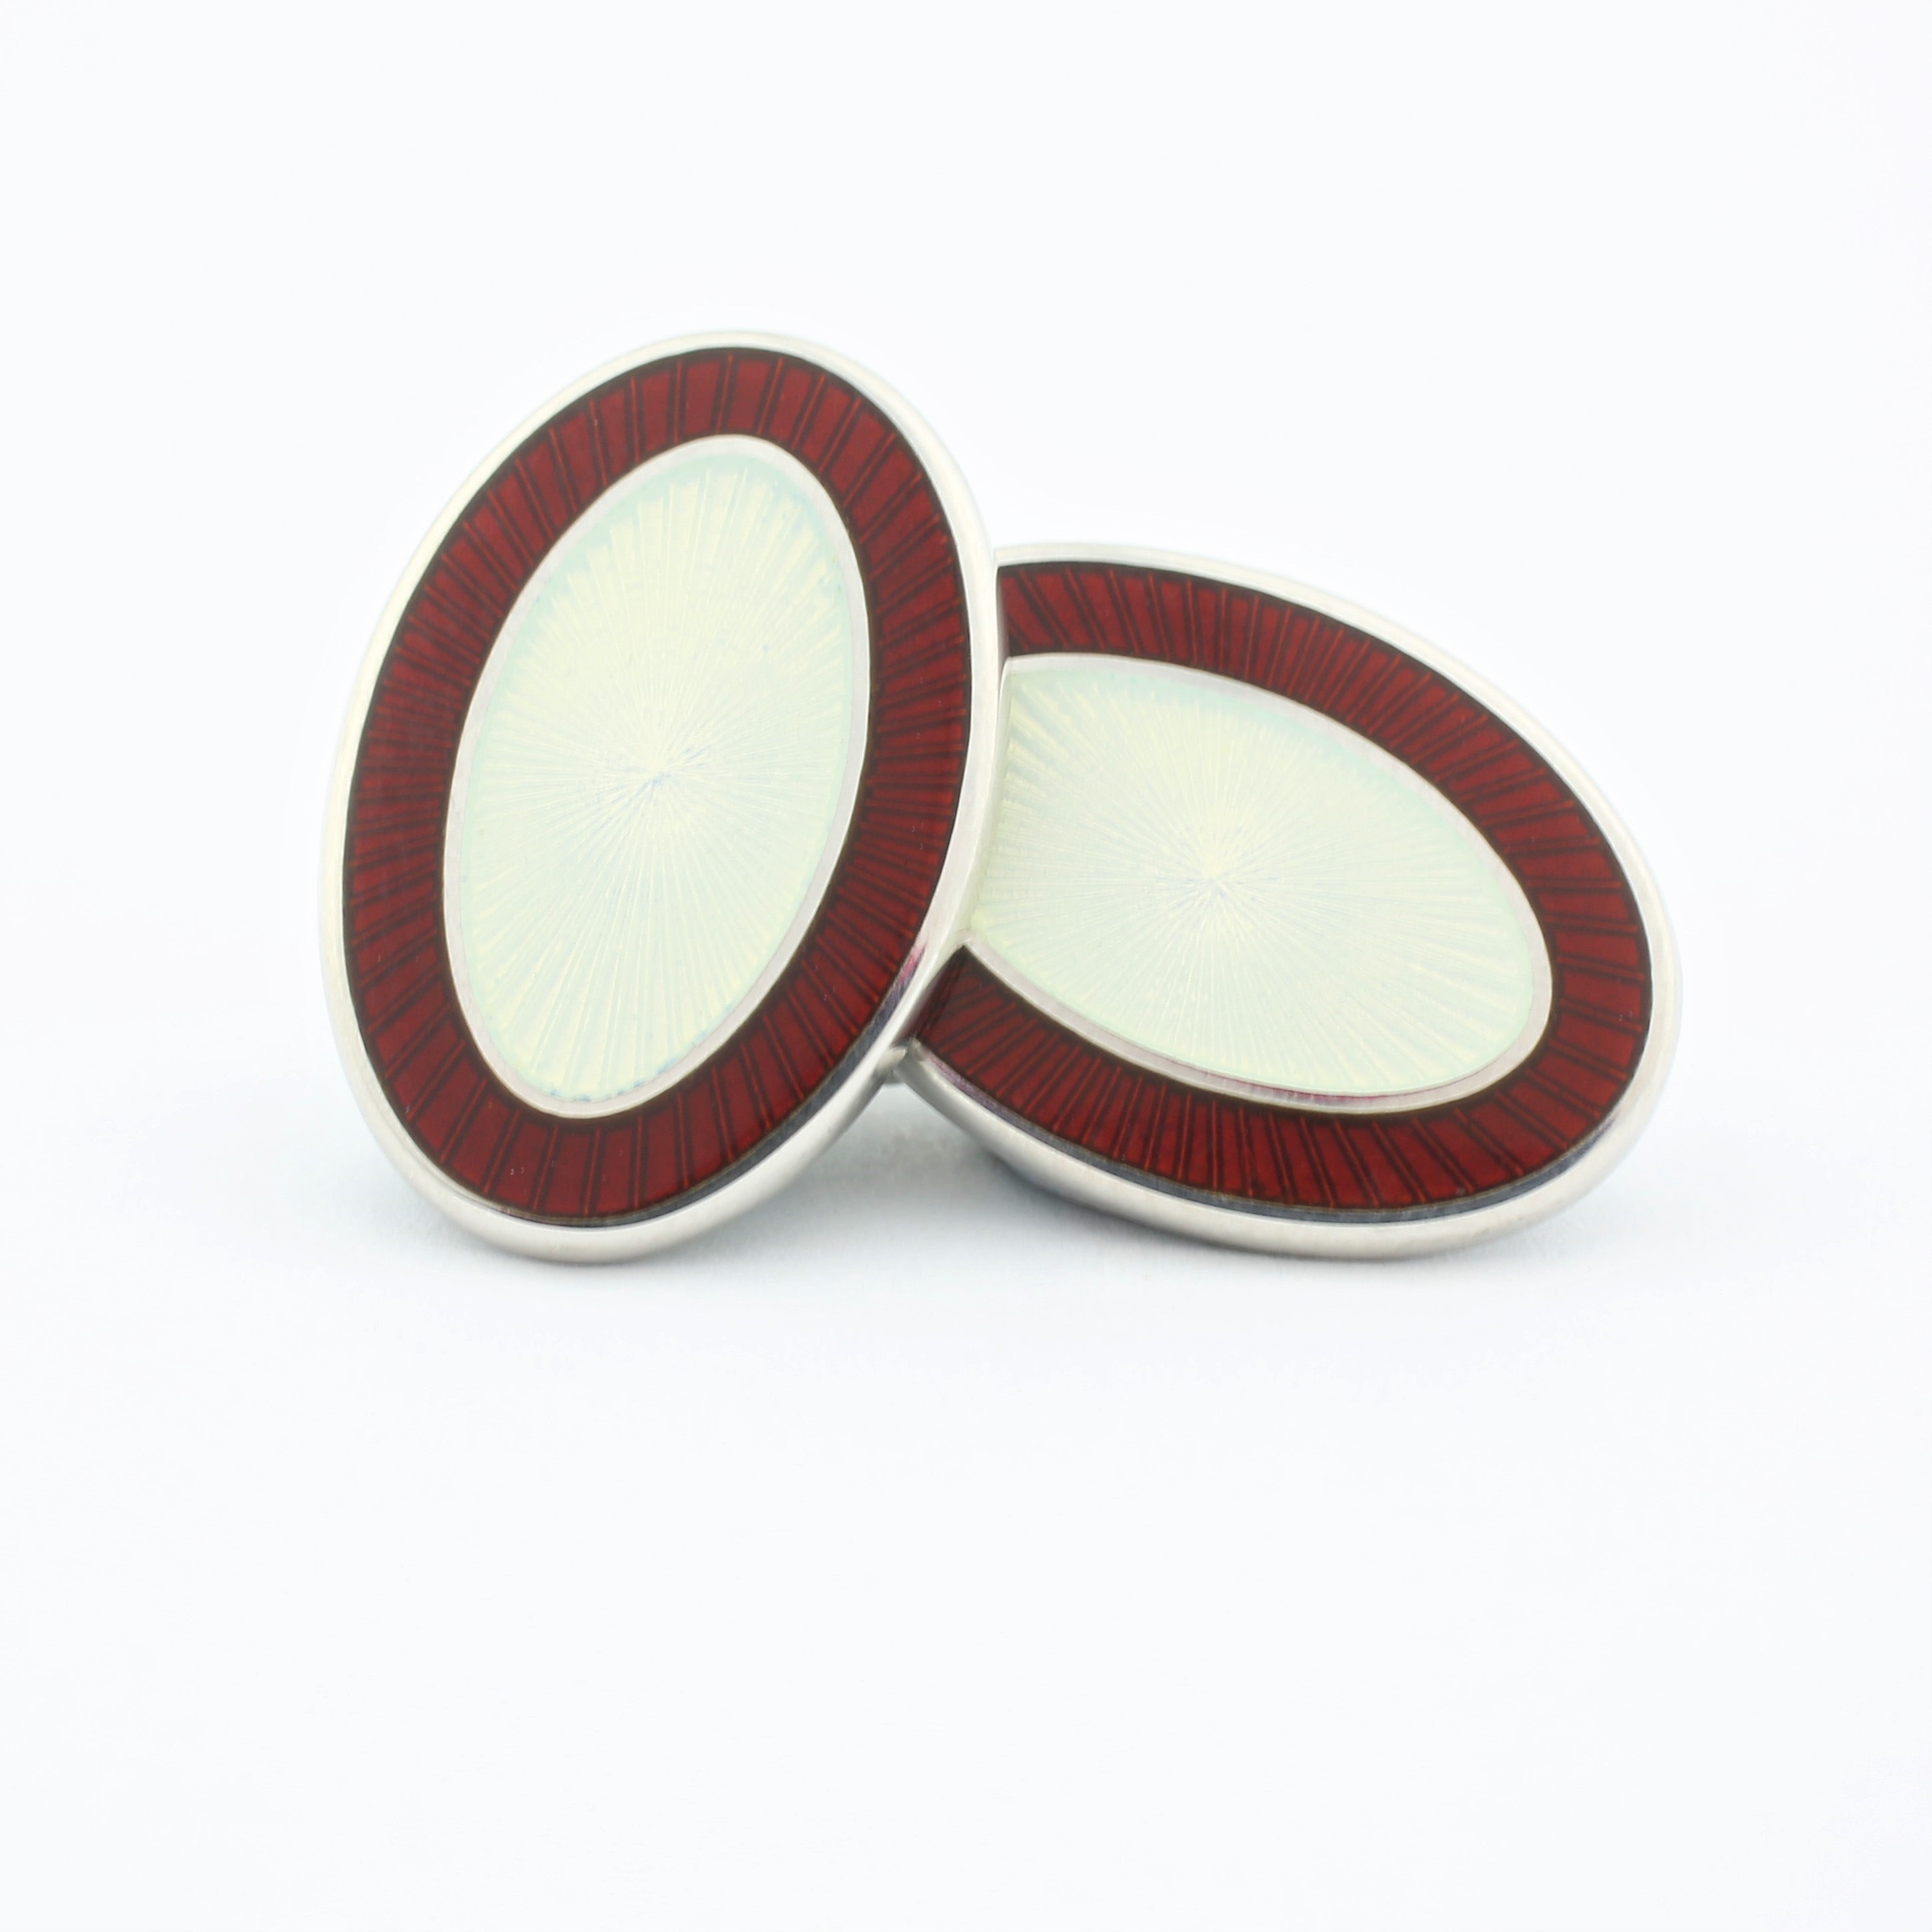 Double oval cufflinks in red and white enamel on silver